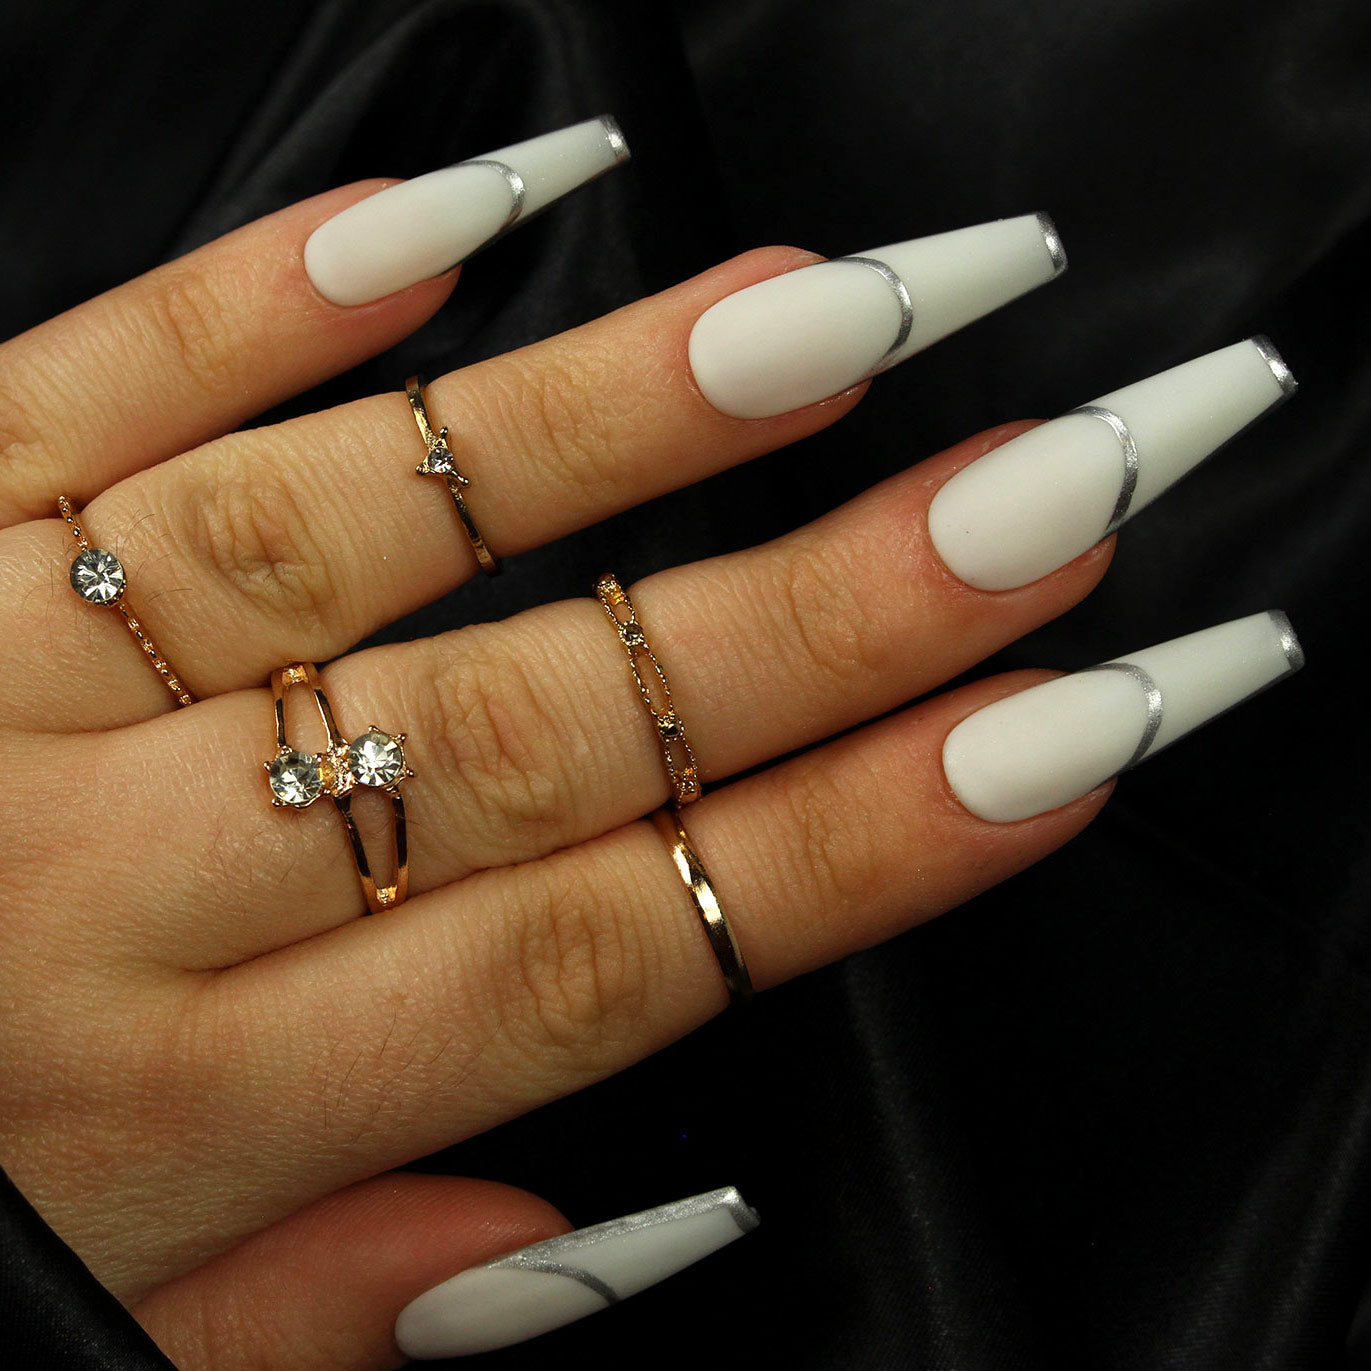 17 Coffin Fall Nail Design Trends to Rock in 2021 | Glamour